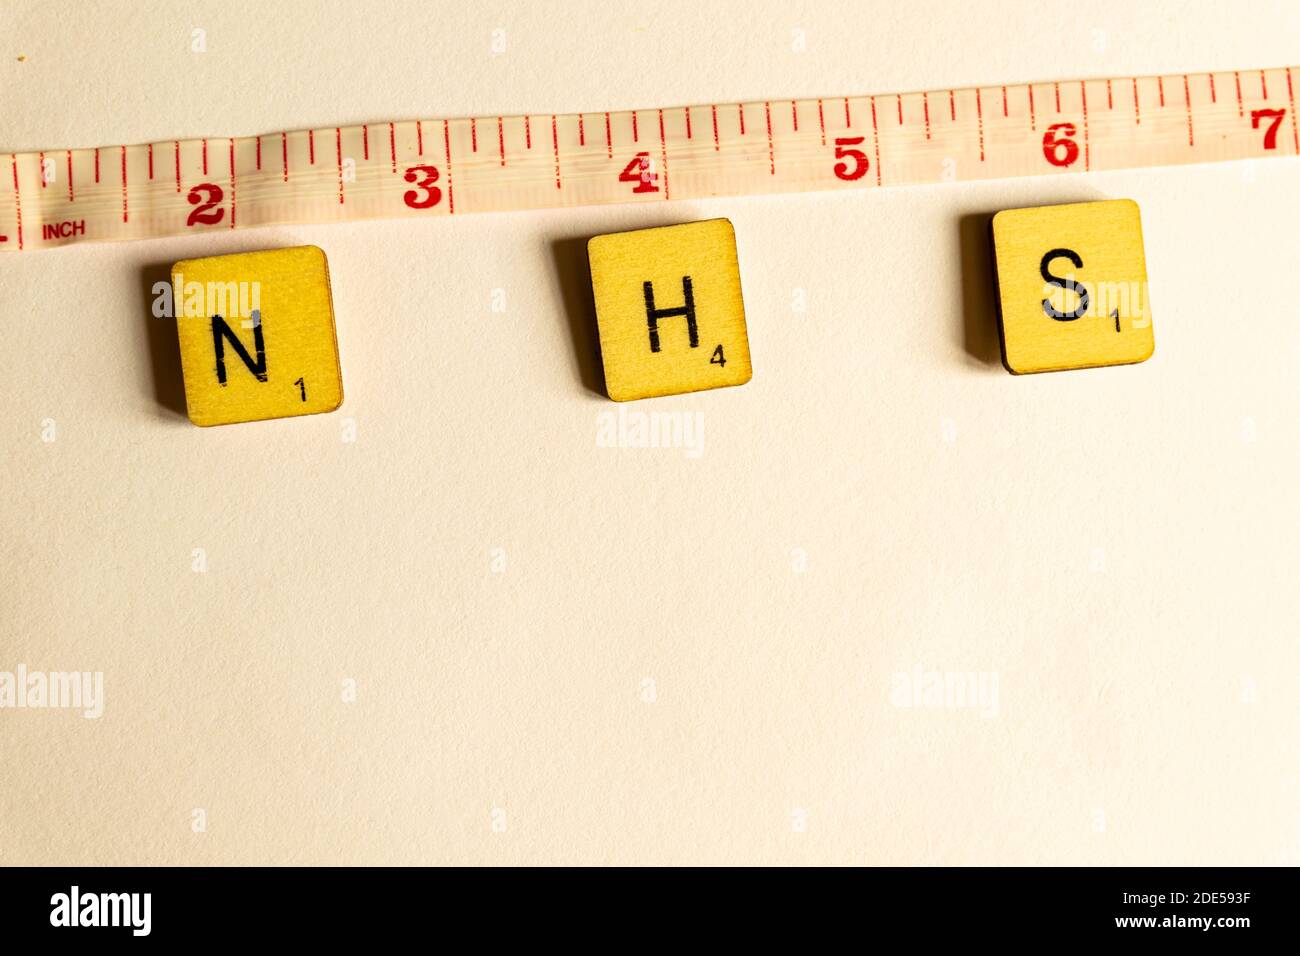 Old worn vintage wooden textured cubes with letters spelling NHS and tape measure depicting the government guidelines to social distance 2 meters to s Stock Photo